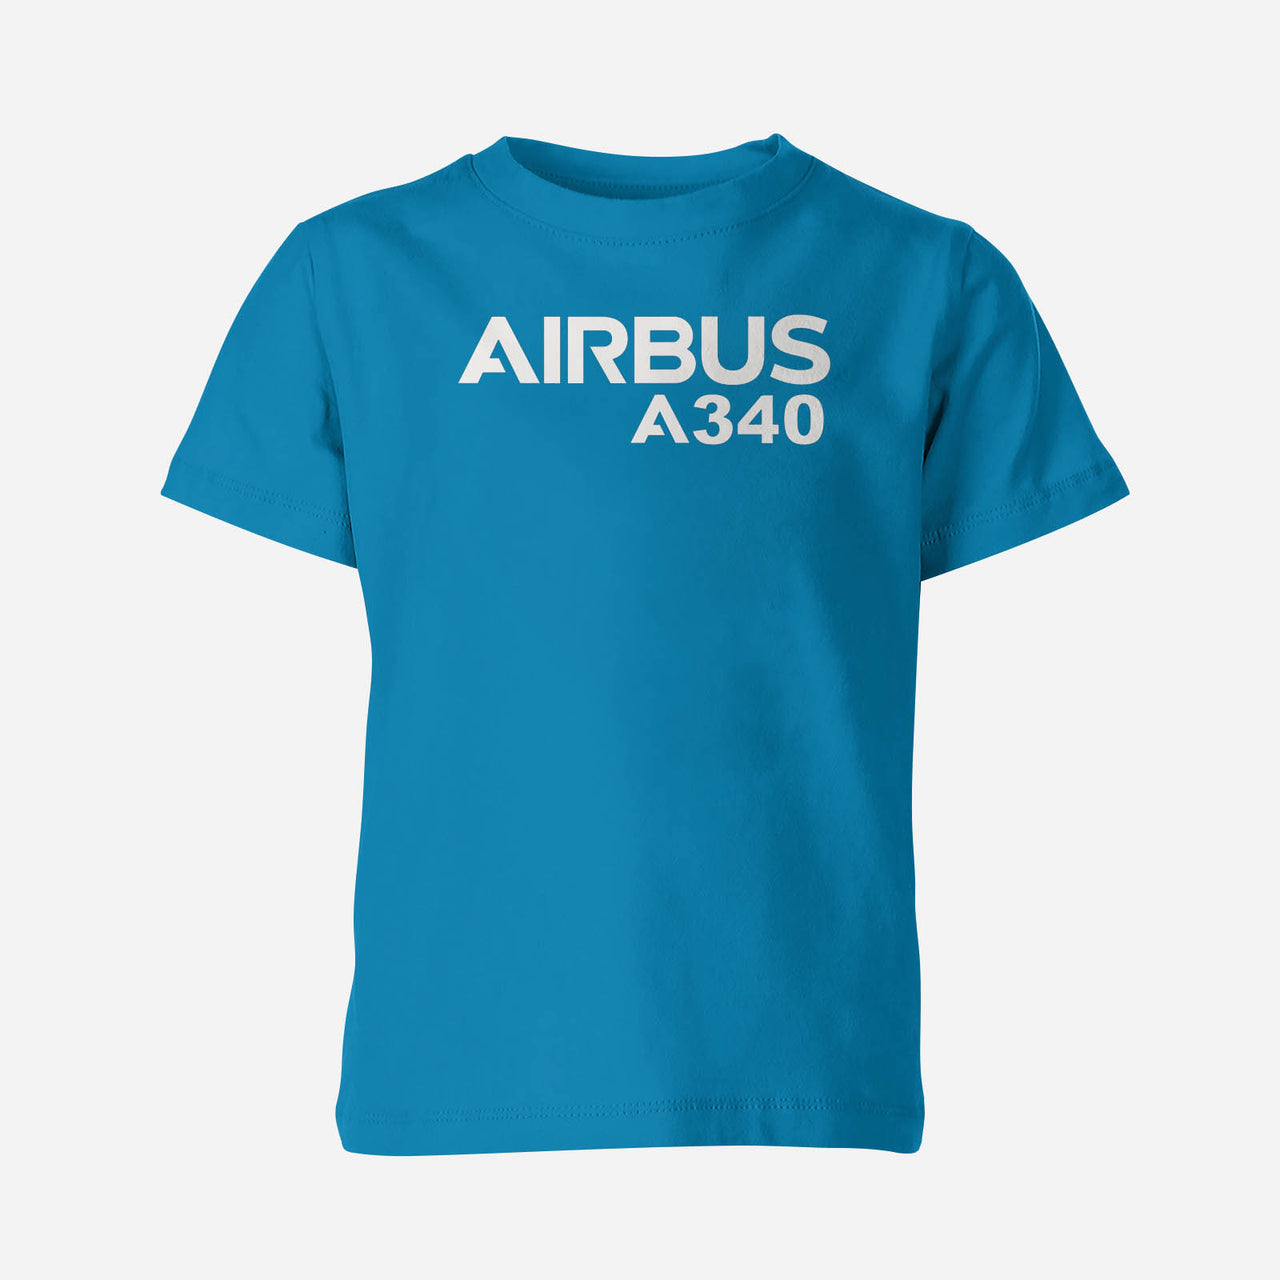 Airbus A340 & Text Designed Children T-Shirts